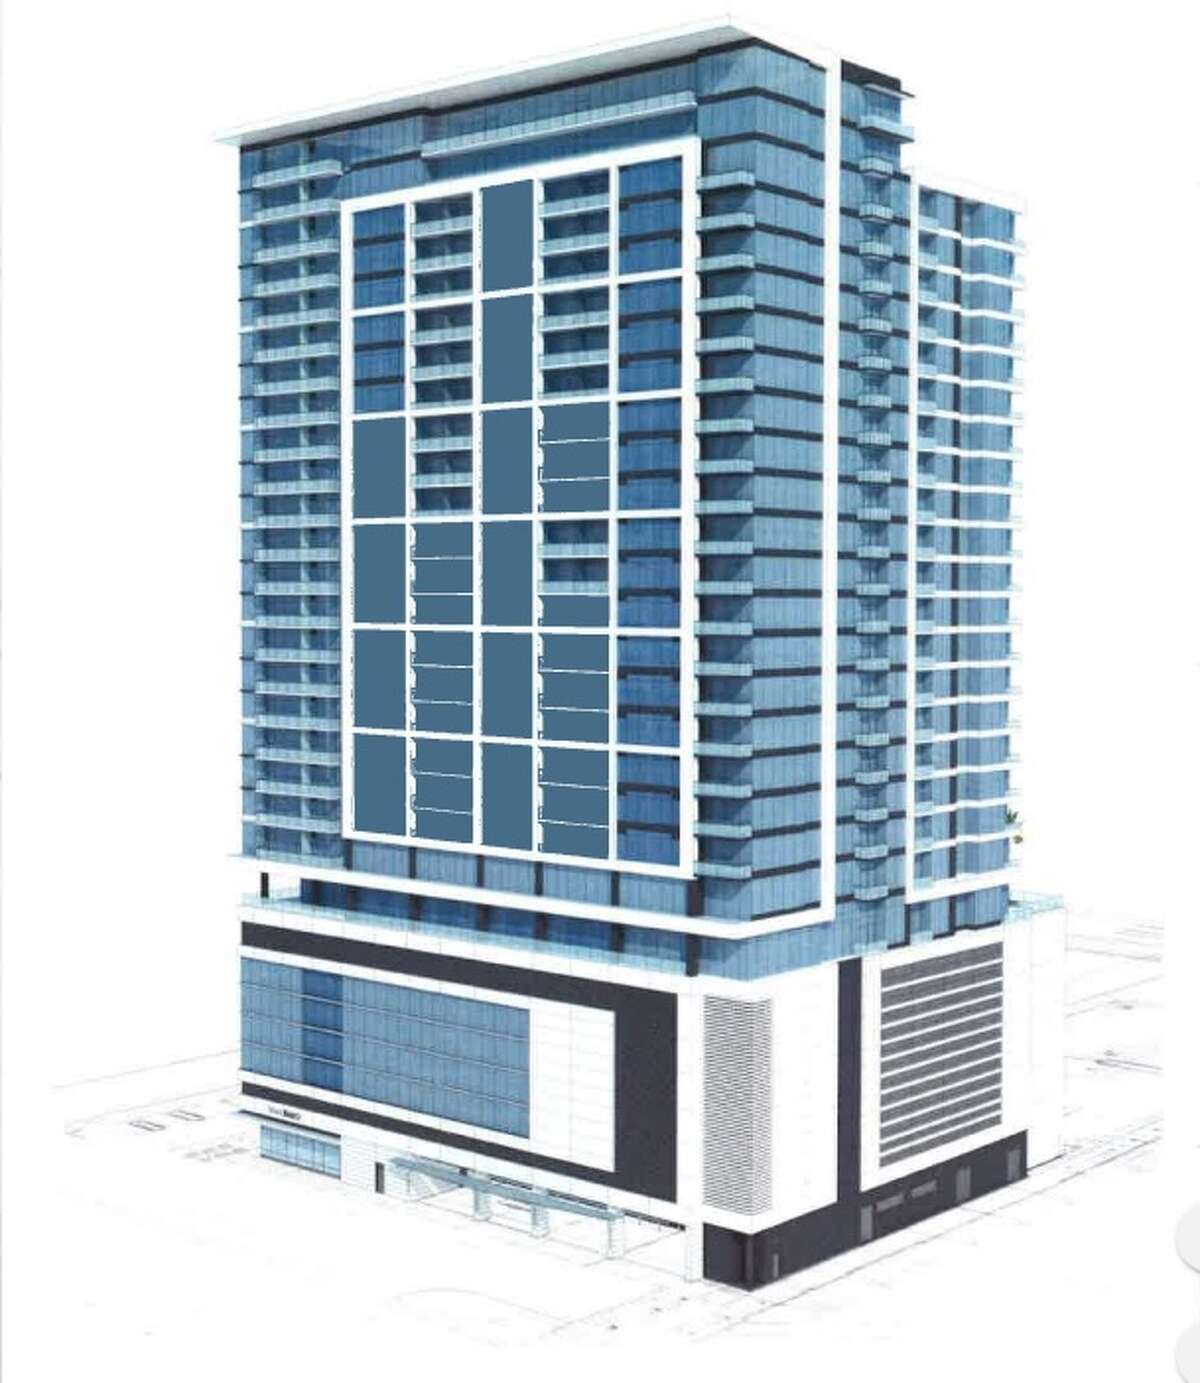 Weingarten Realty plans to build a 29-story tower in part of the River Oaks Shipping District. 